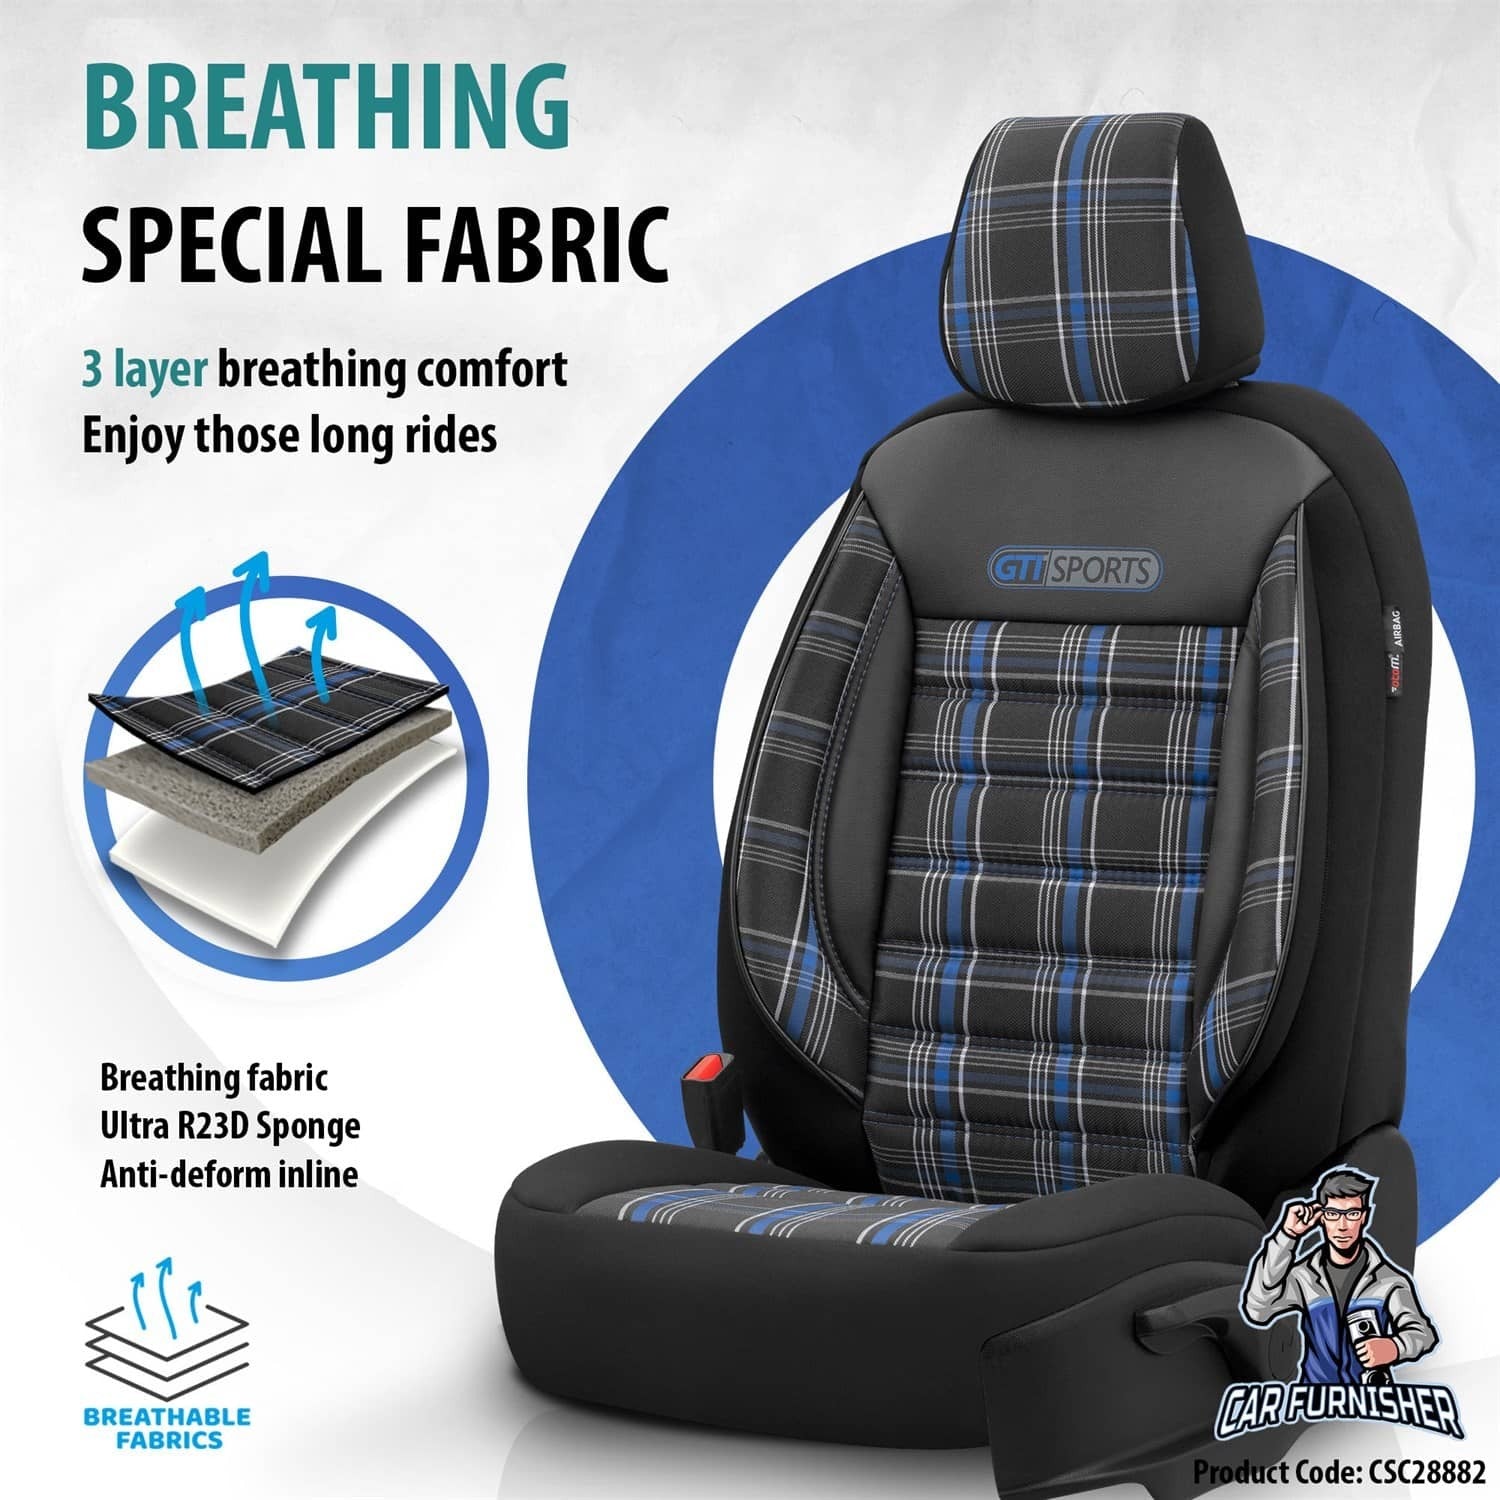 Luxury Car Seat Cover Set (8 Colors) | Sports Series Blue Leather & Fabric